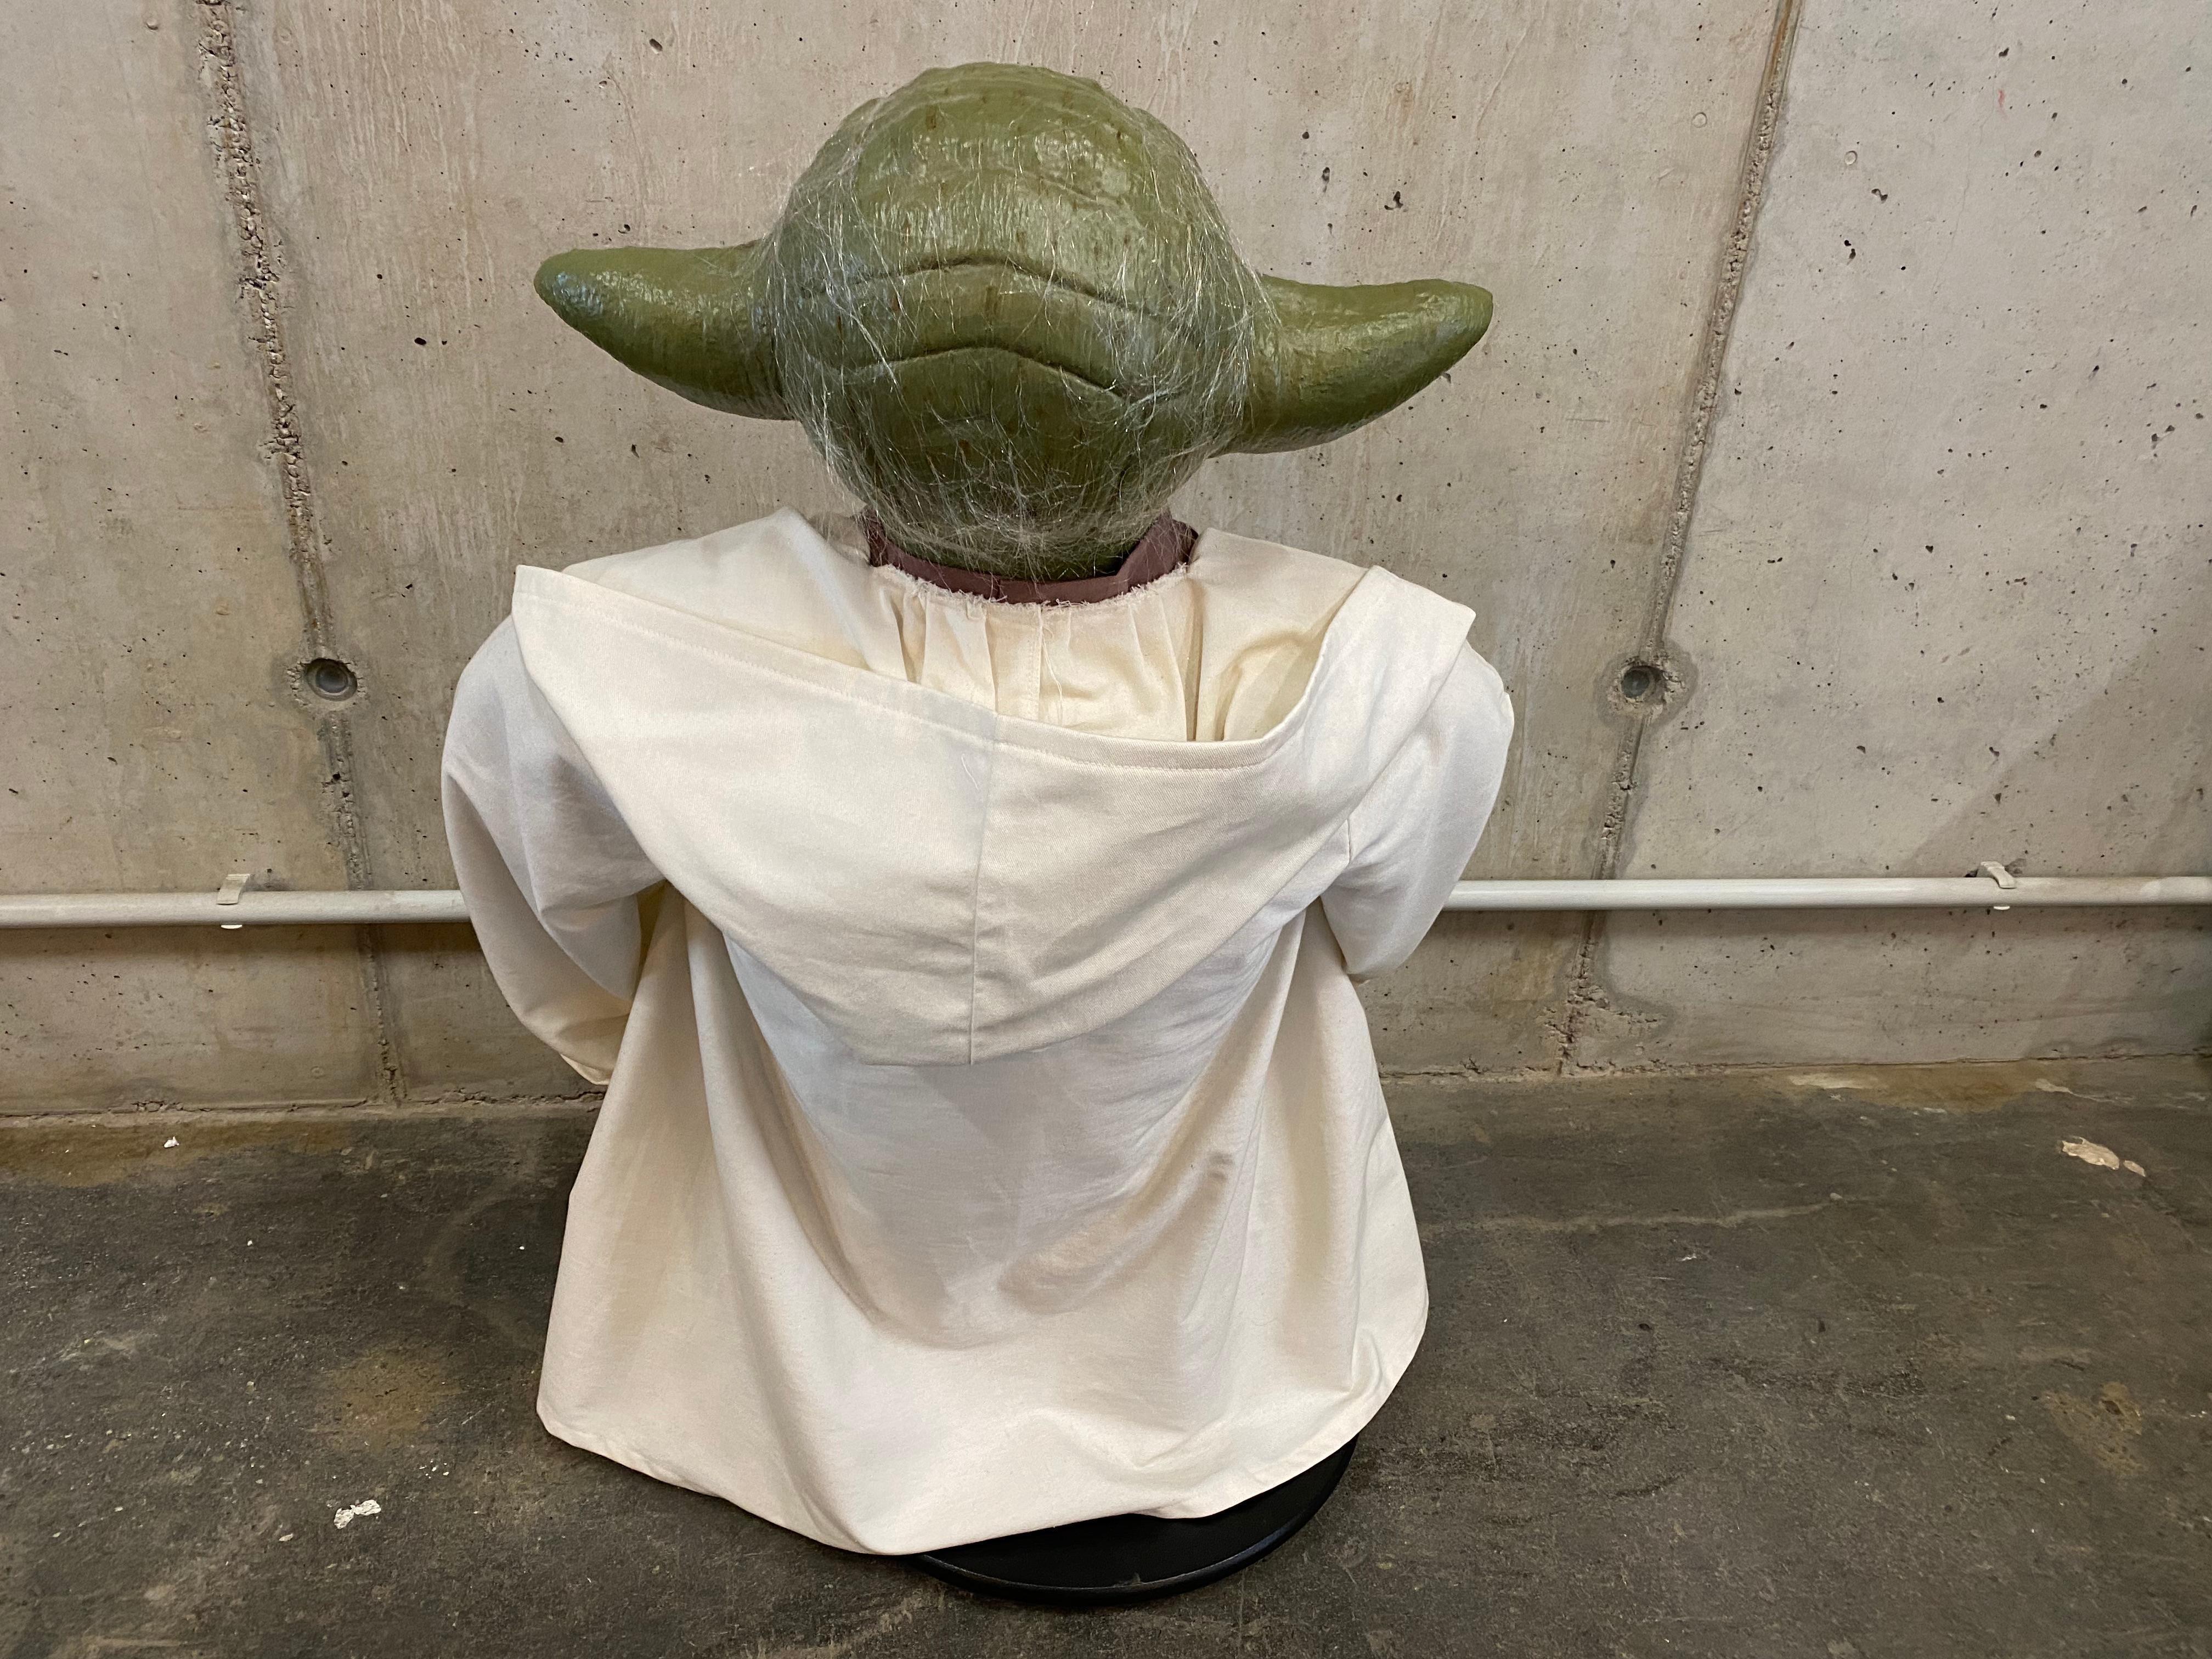 Post-Modern Life Size Yoda Figure, Edition of 50, Could Be Star Wars Photo Requisite For Sale